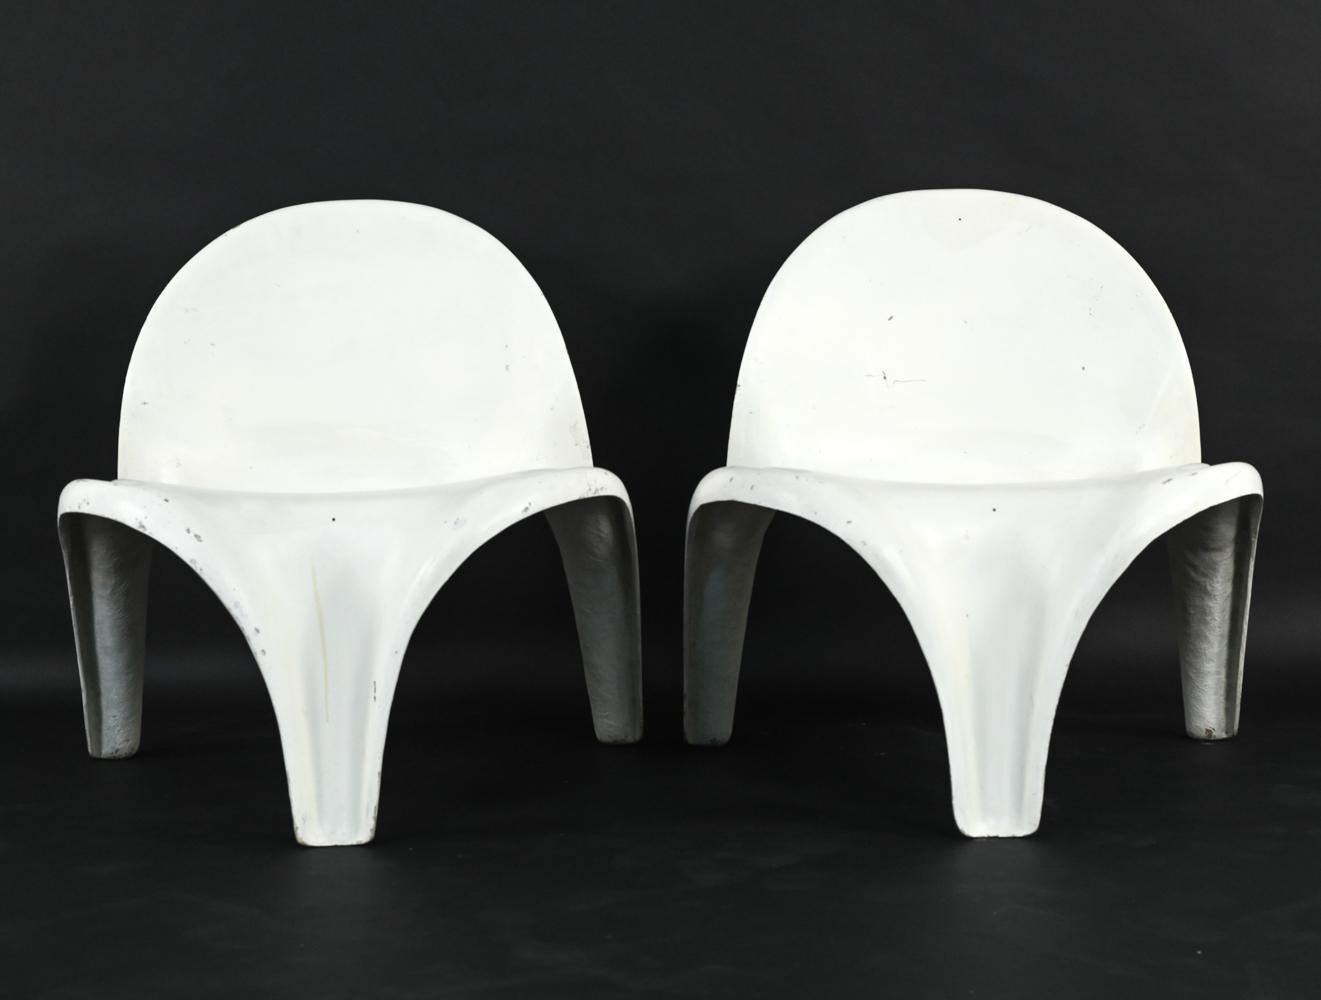 A rare and unusual pair of Danish mid-century lounge chairs designed by Aage Egeriis for France & Son, c. 1960's. Made of fiberglass-reinforced polyester, these sturdy chairs are commonly referred to as 